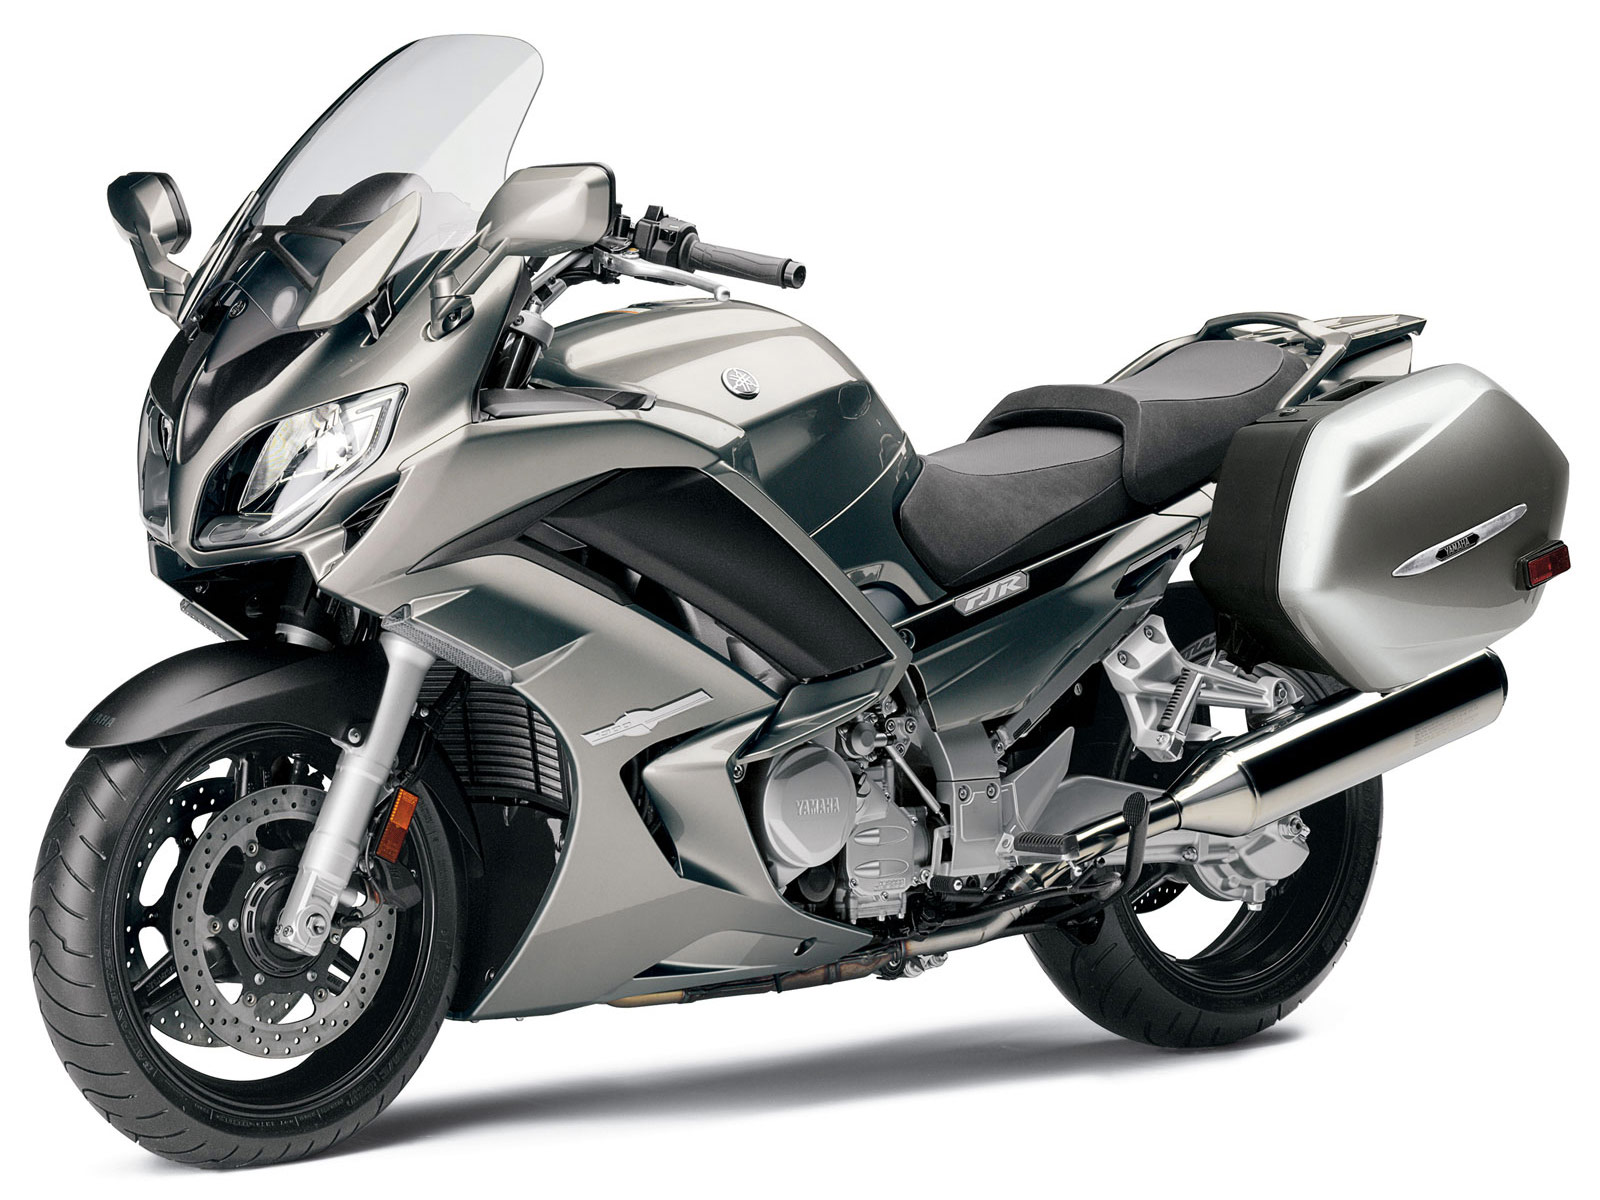 2013 FJR1300A ABS YAMAHA Motorcycle Insurance Information